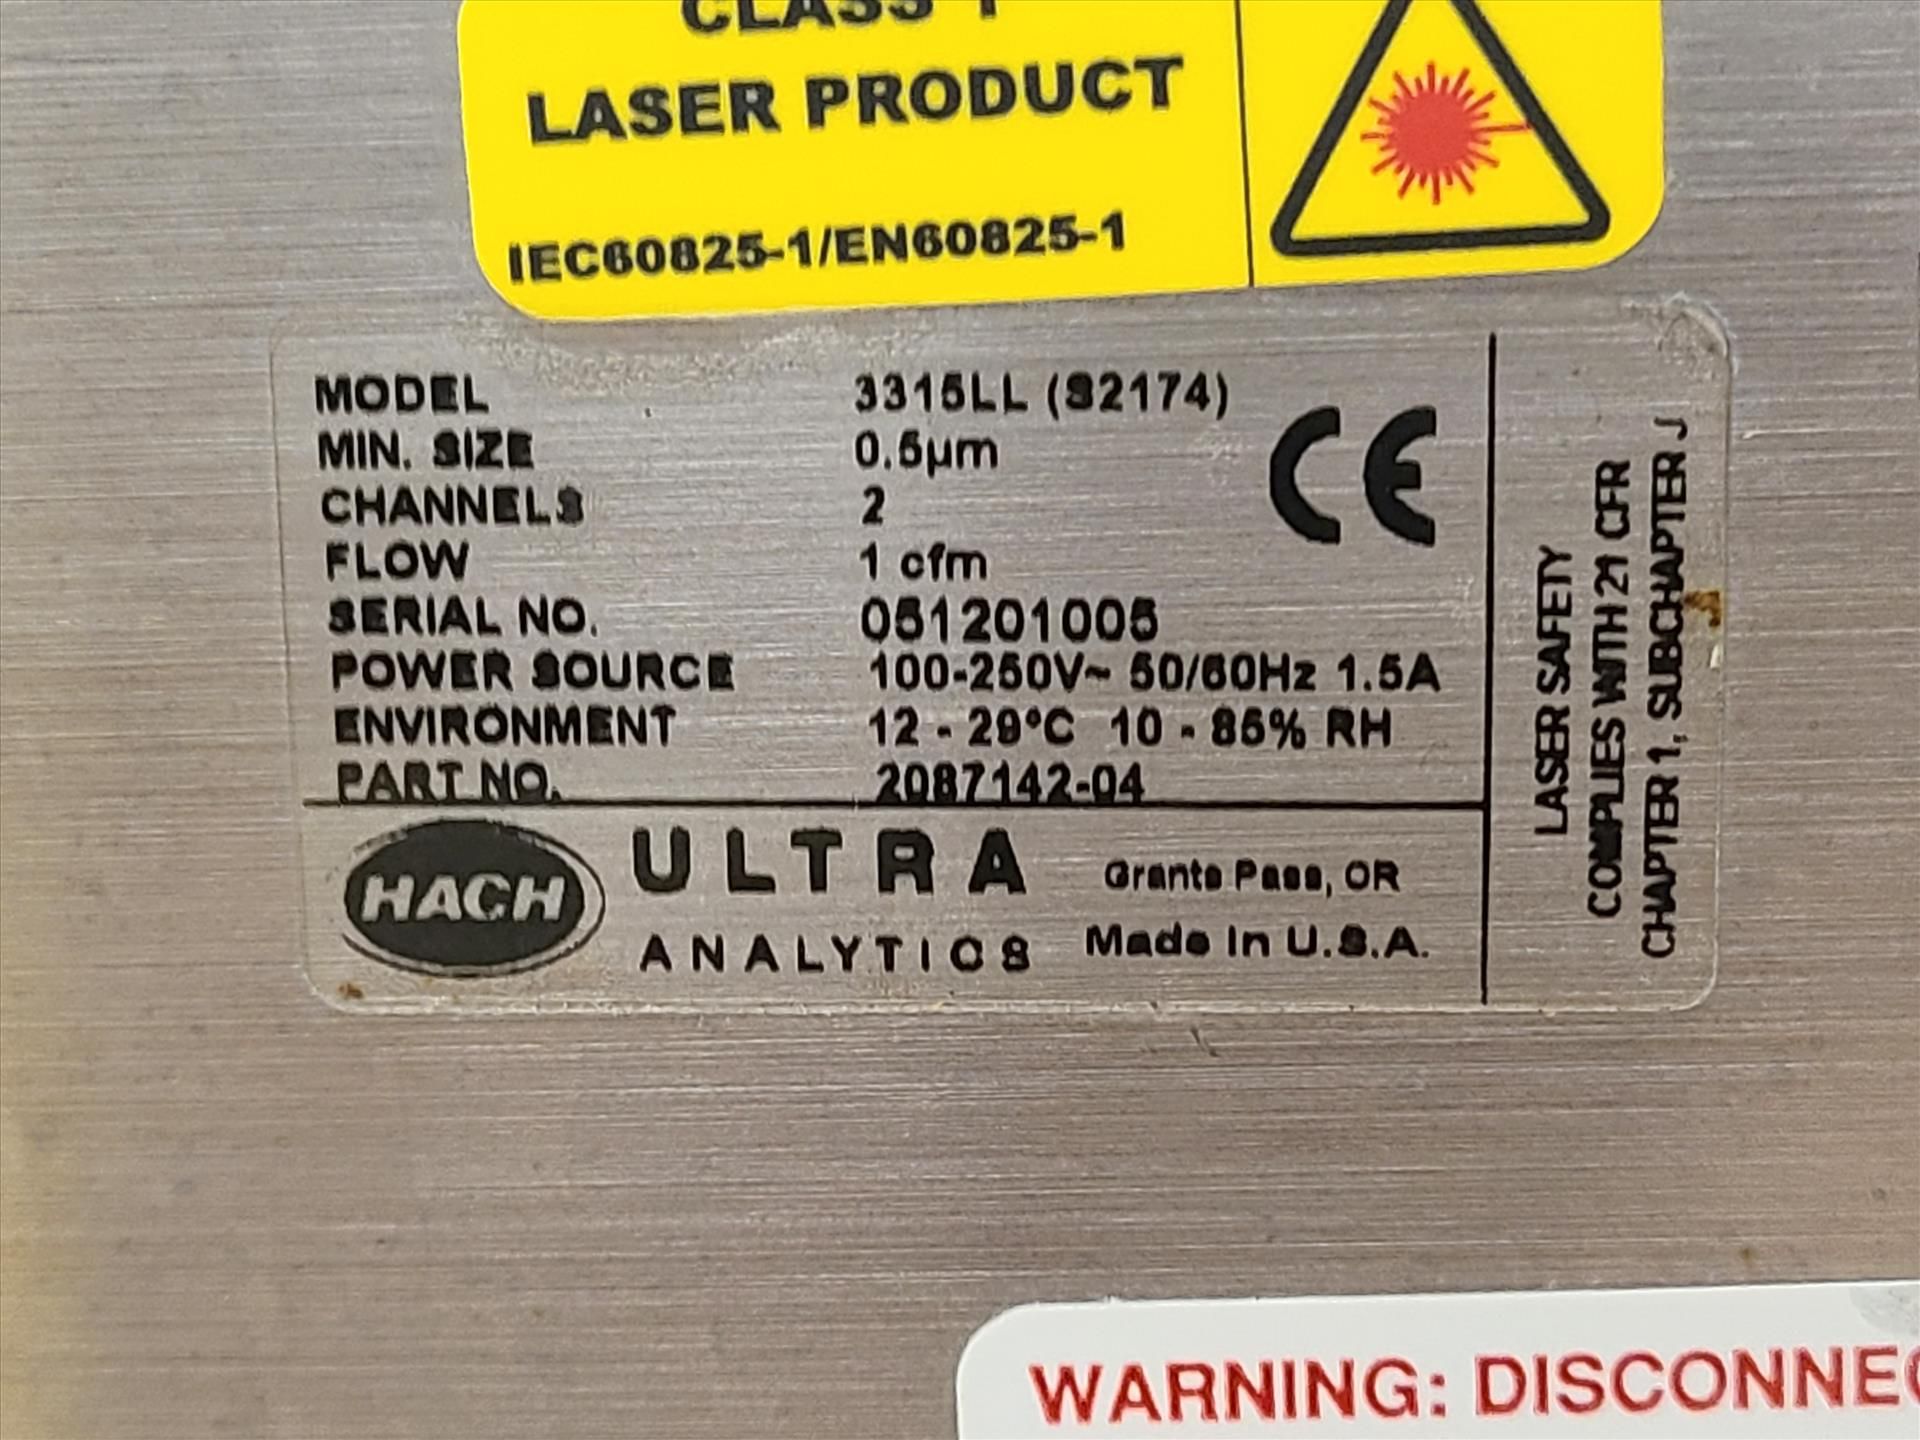 Hach Ultra Analytics Air Particle Counter, mod. 3315LL, ser. no. 051201005, 100-250 volts, 50/60 Hz - Image 4 of 4